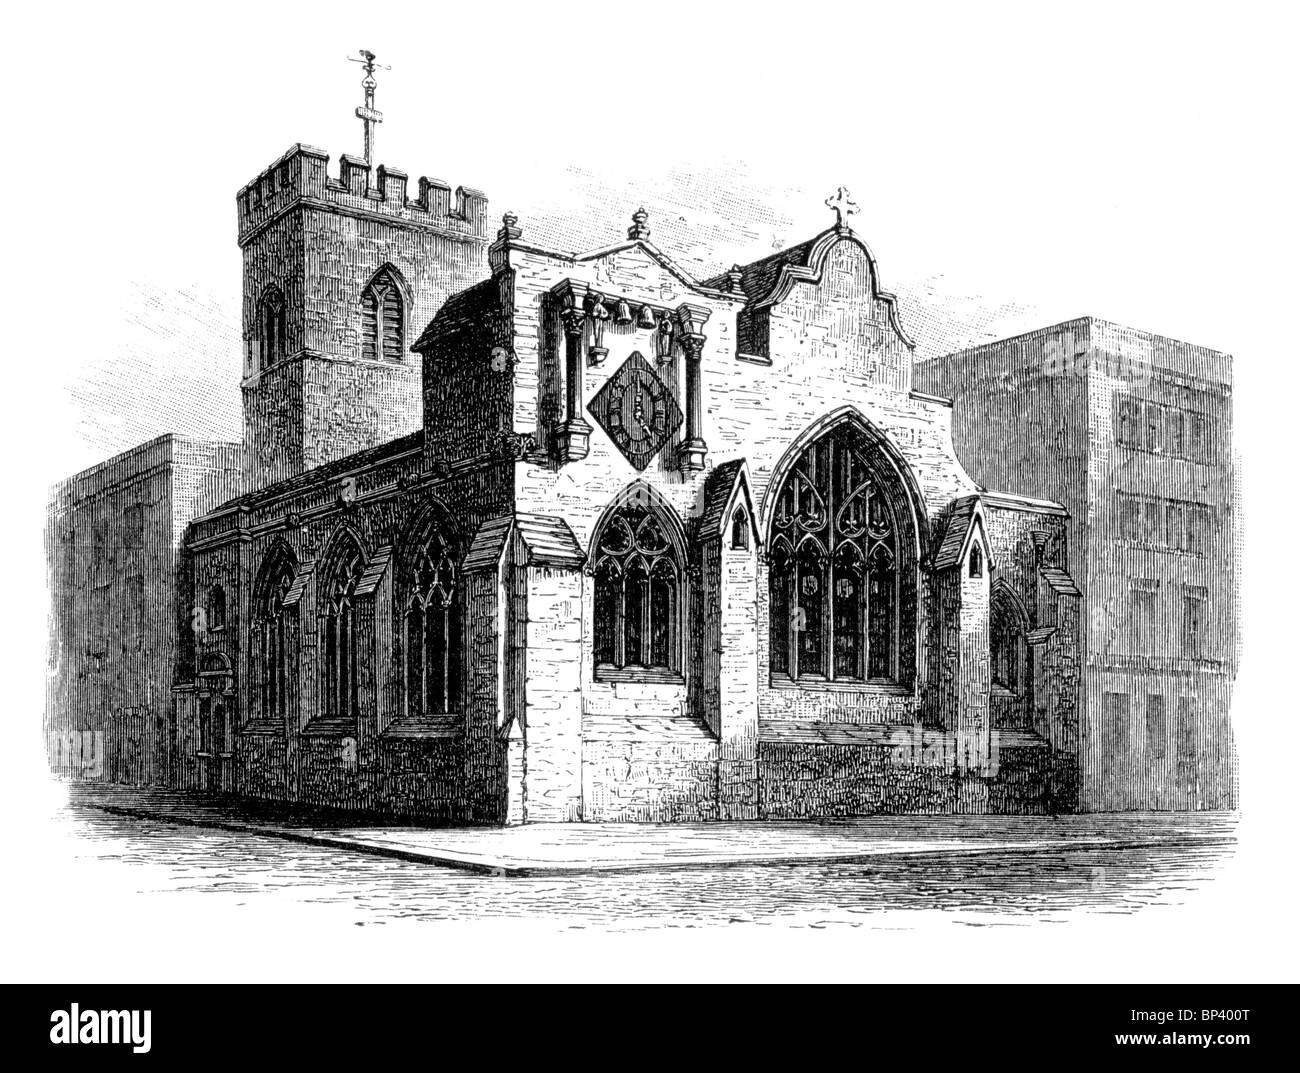 Black and White Illustration; Old Church of St Martin, Oxford demolished in the 18th century Stock Photo